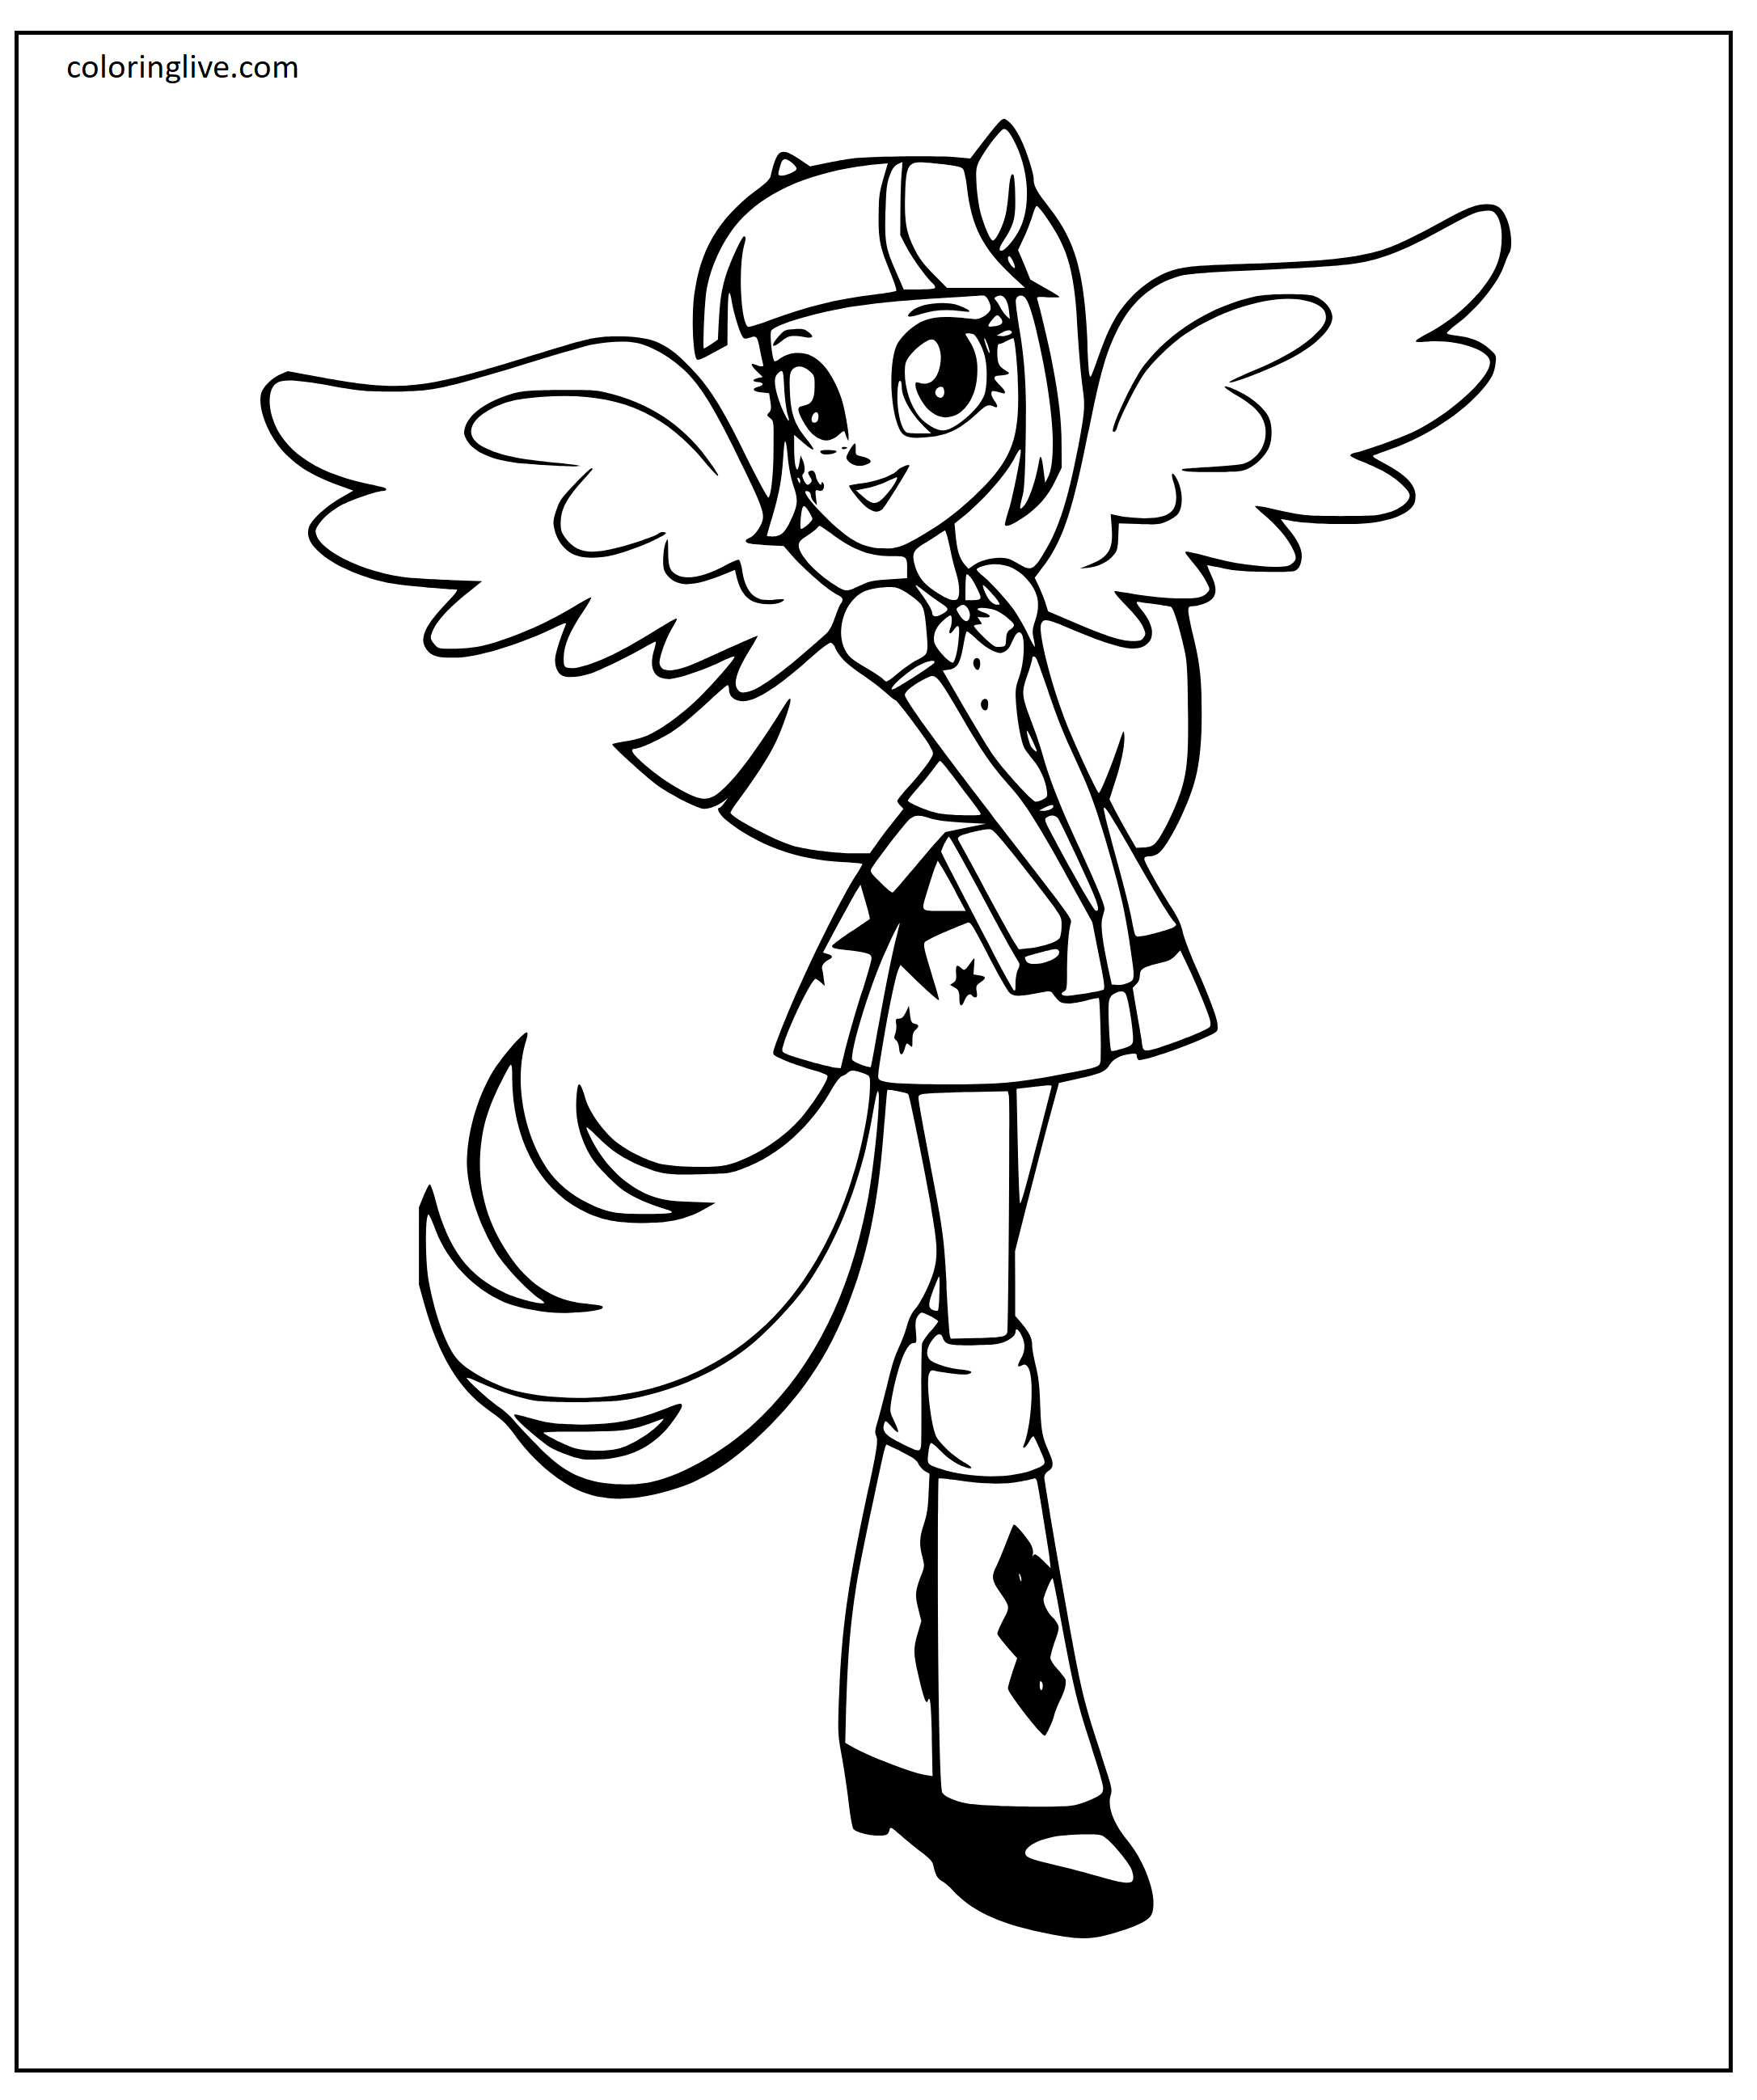 Printable MLP Twilight Sparkle Coloring Page for kids.